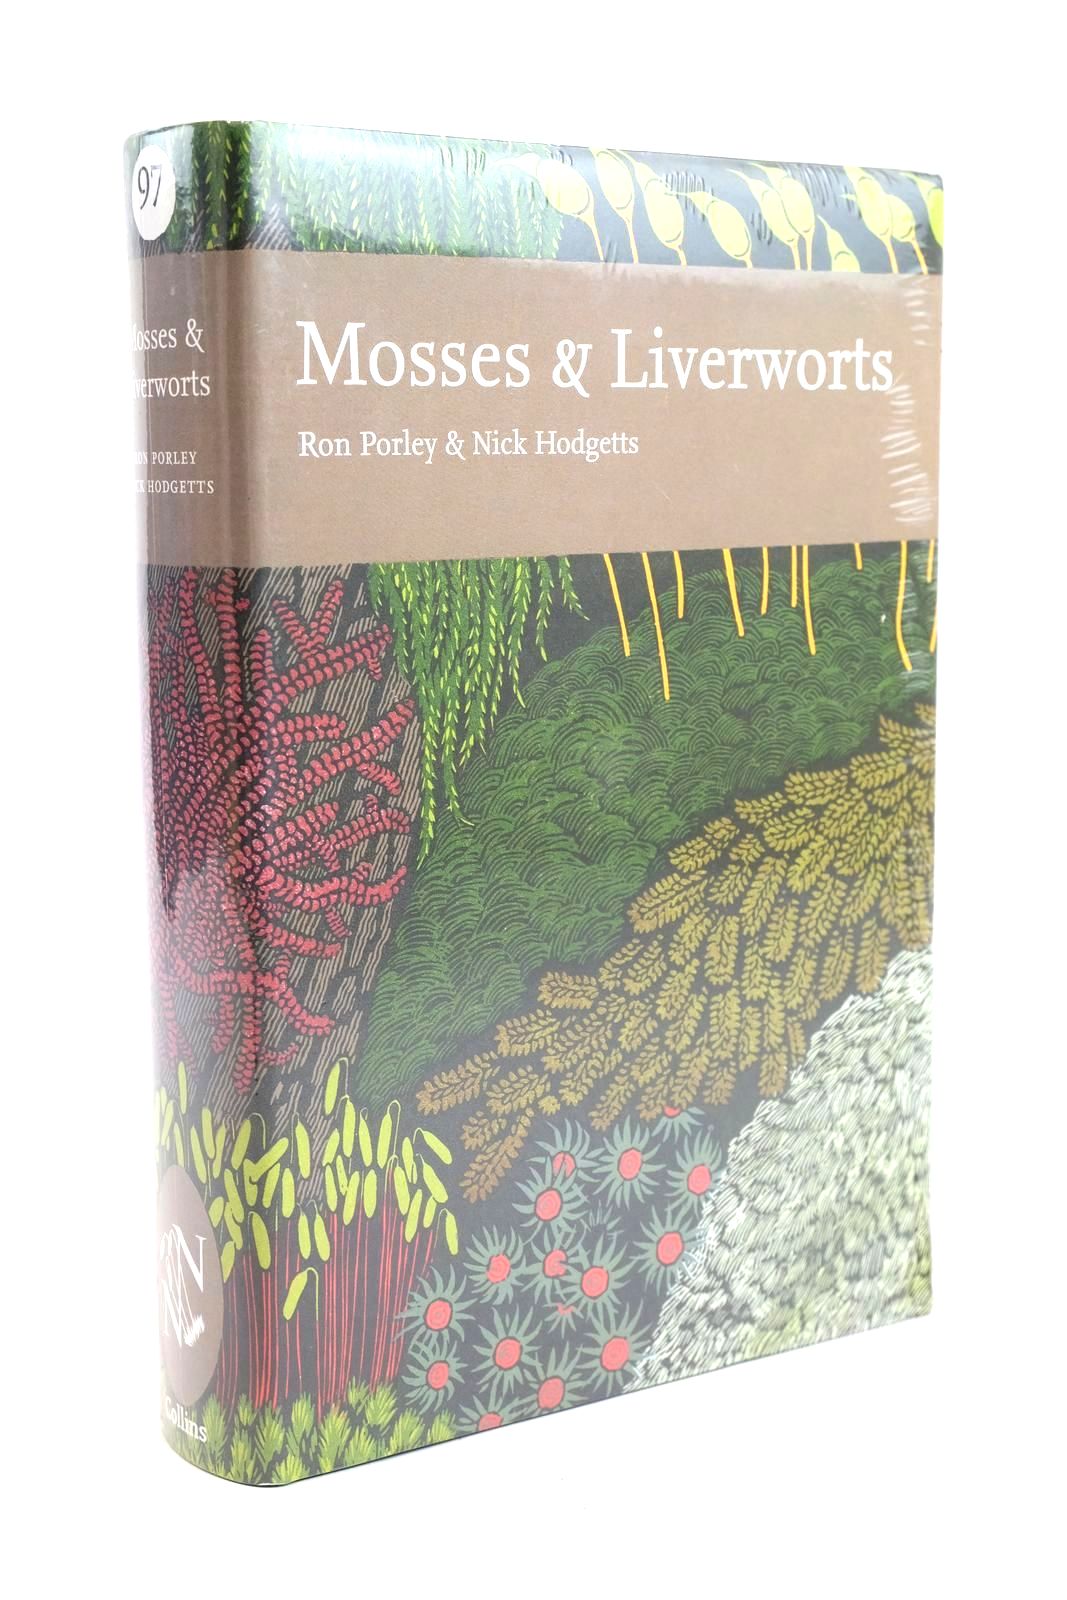 Photo of MOSSES & LIVERWORTS (NN 97) written by Porley, Ron
Hodgetts, Nick published by Collins (STOCK CODE: 1320405)  for sale by Stella & Rose's Books